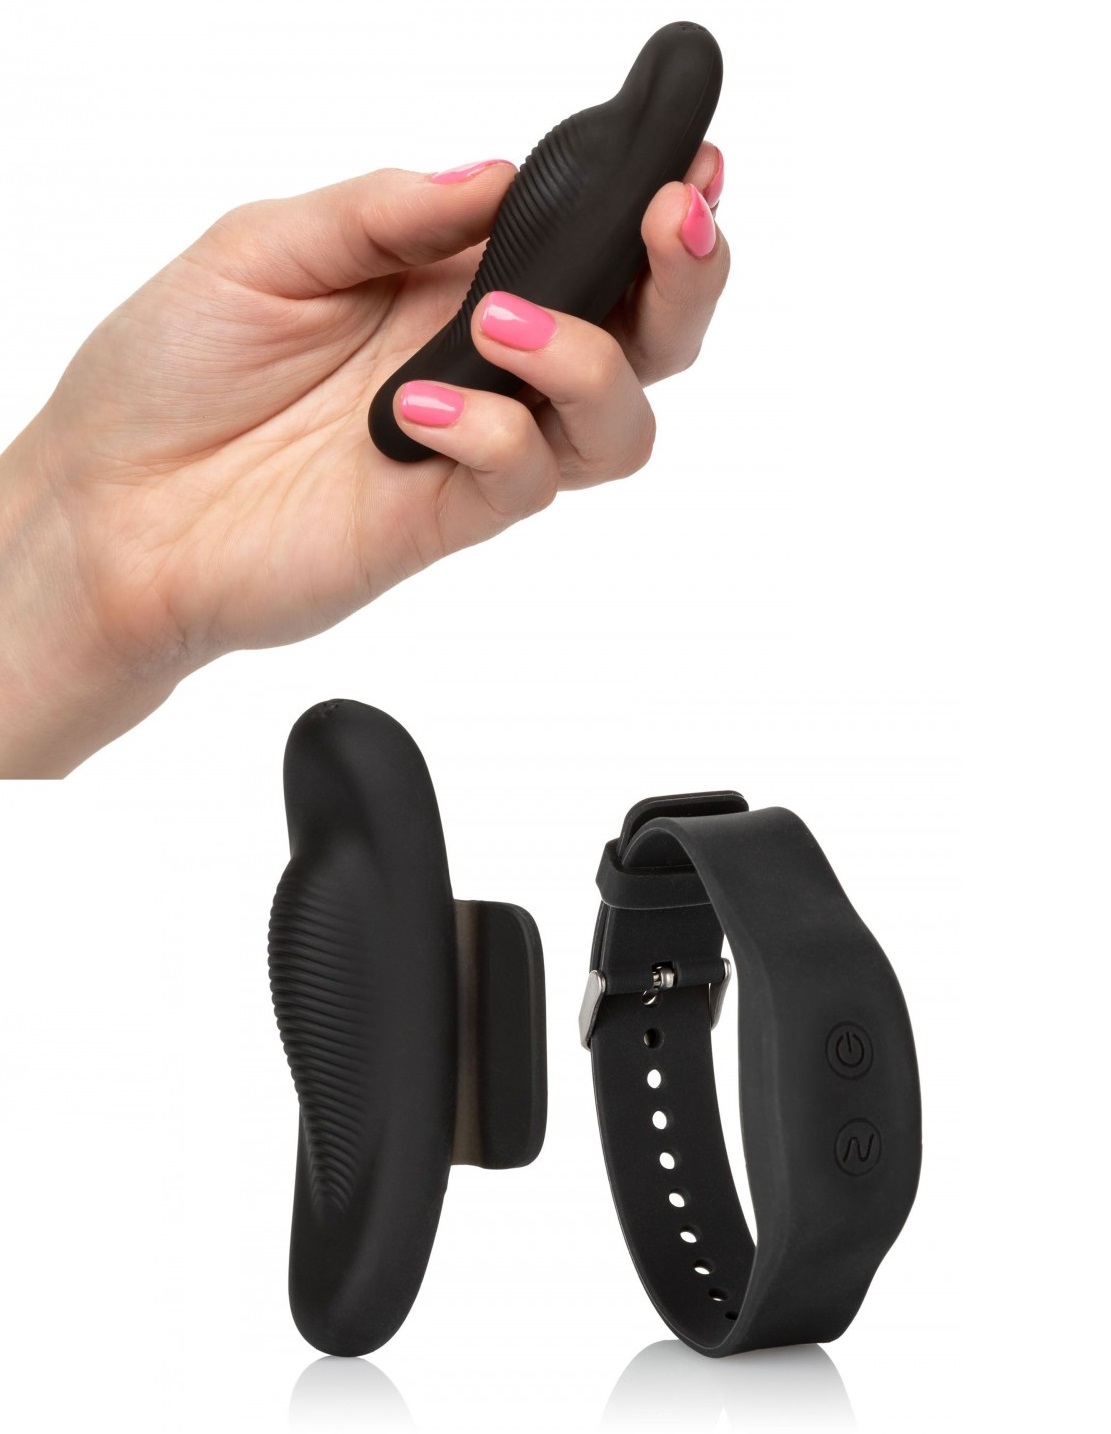 Wristband Remote Panty Teaser.